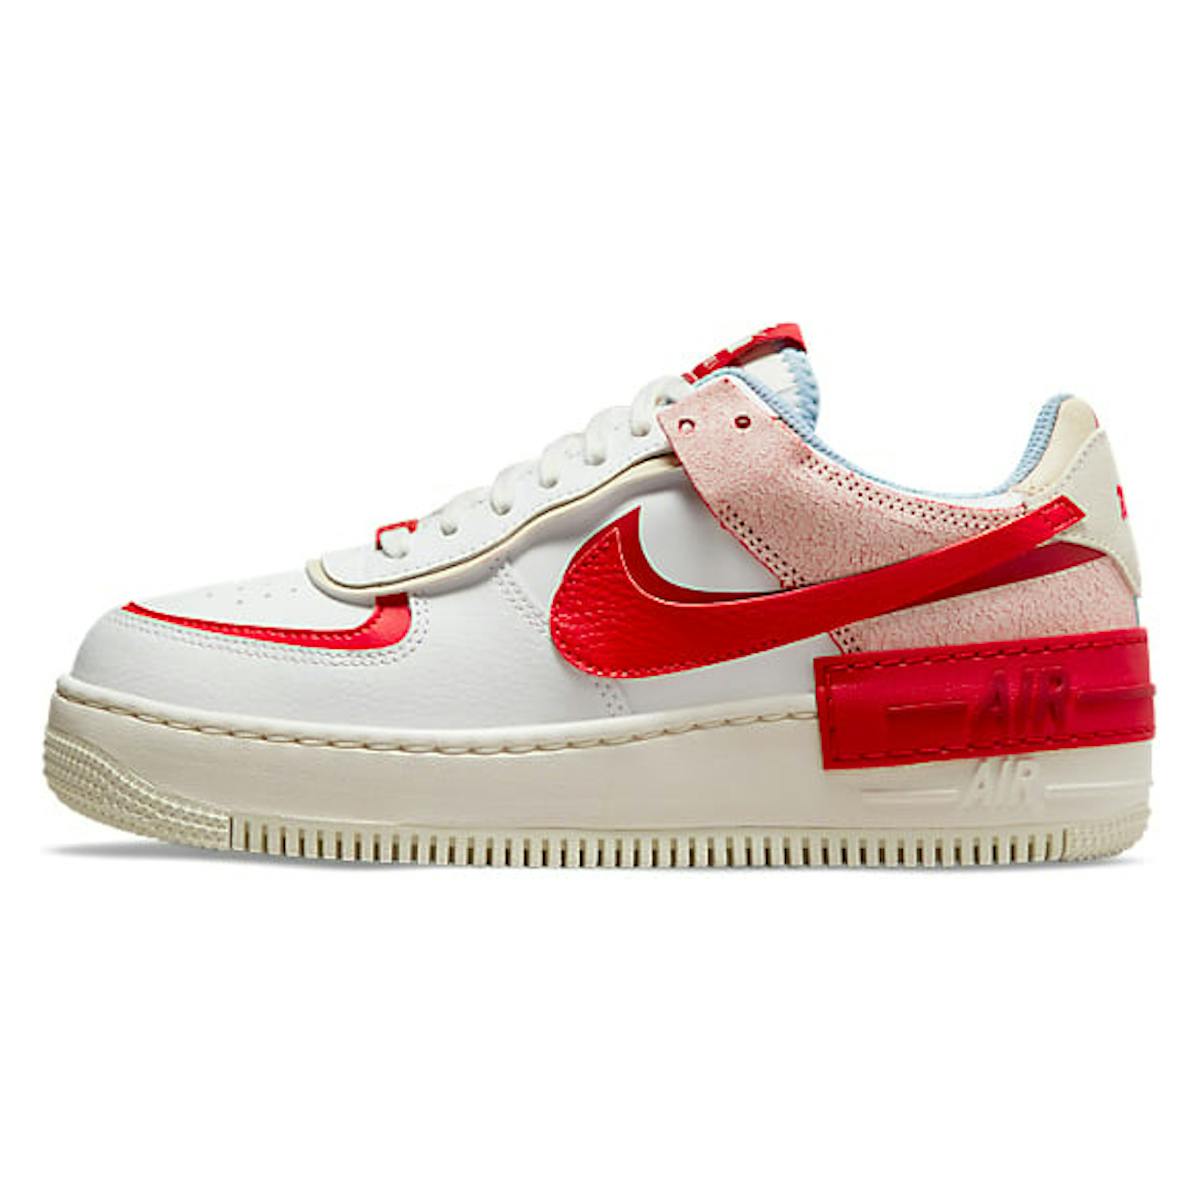 Nike Air Force 1 Shadow "University Red"